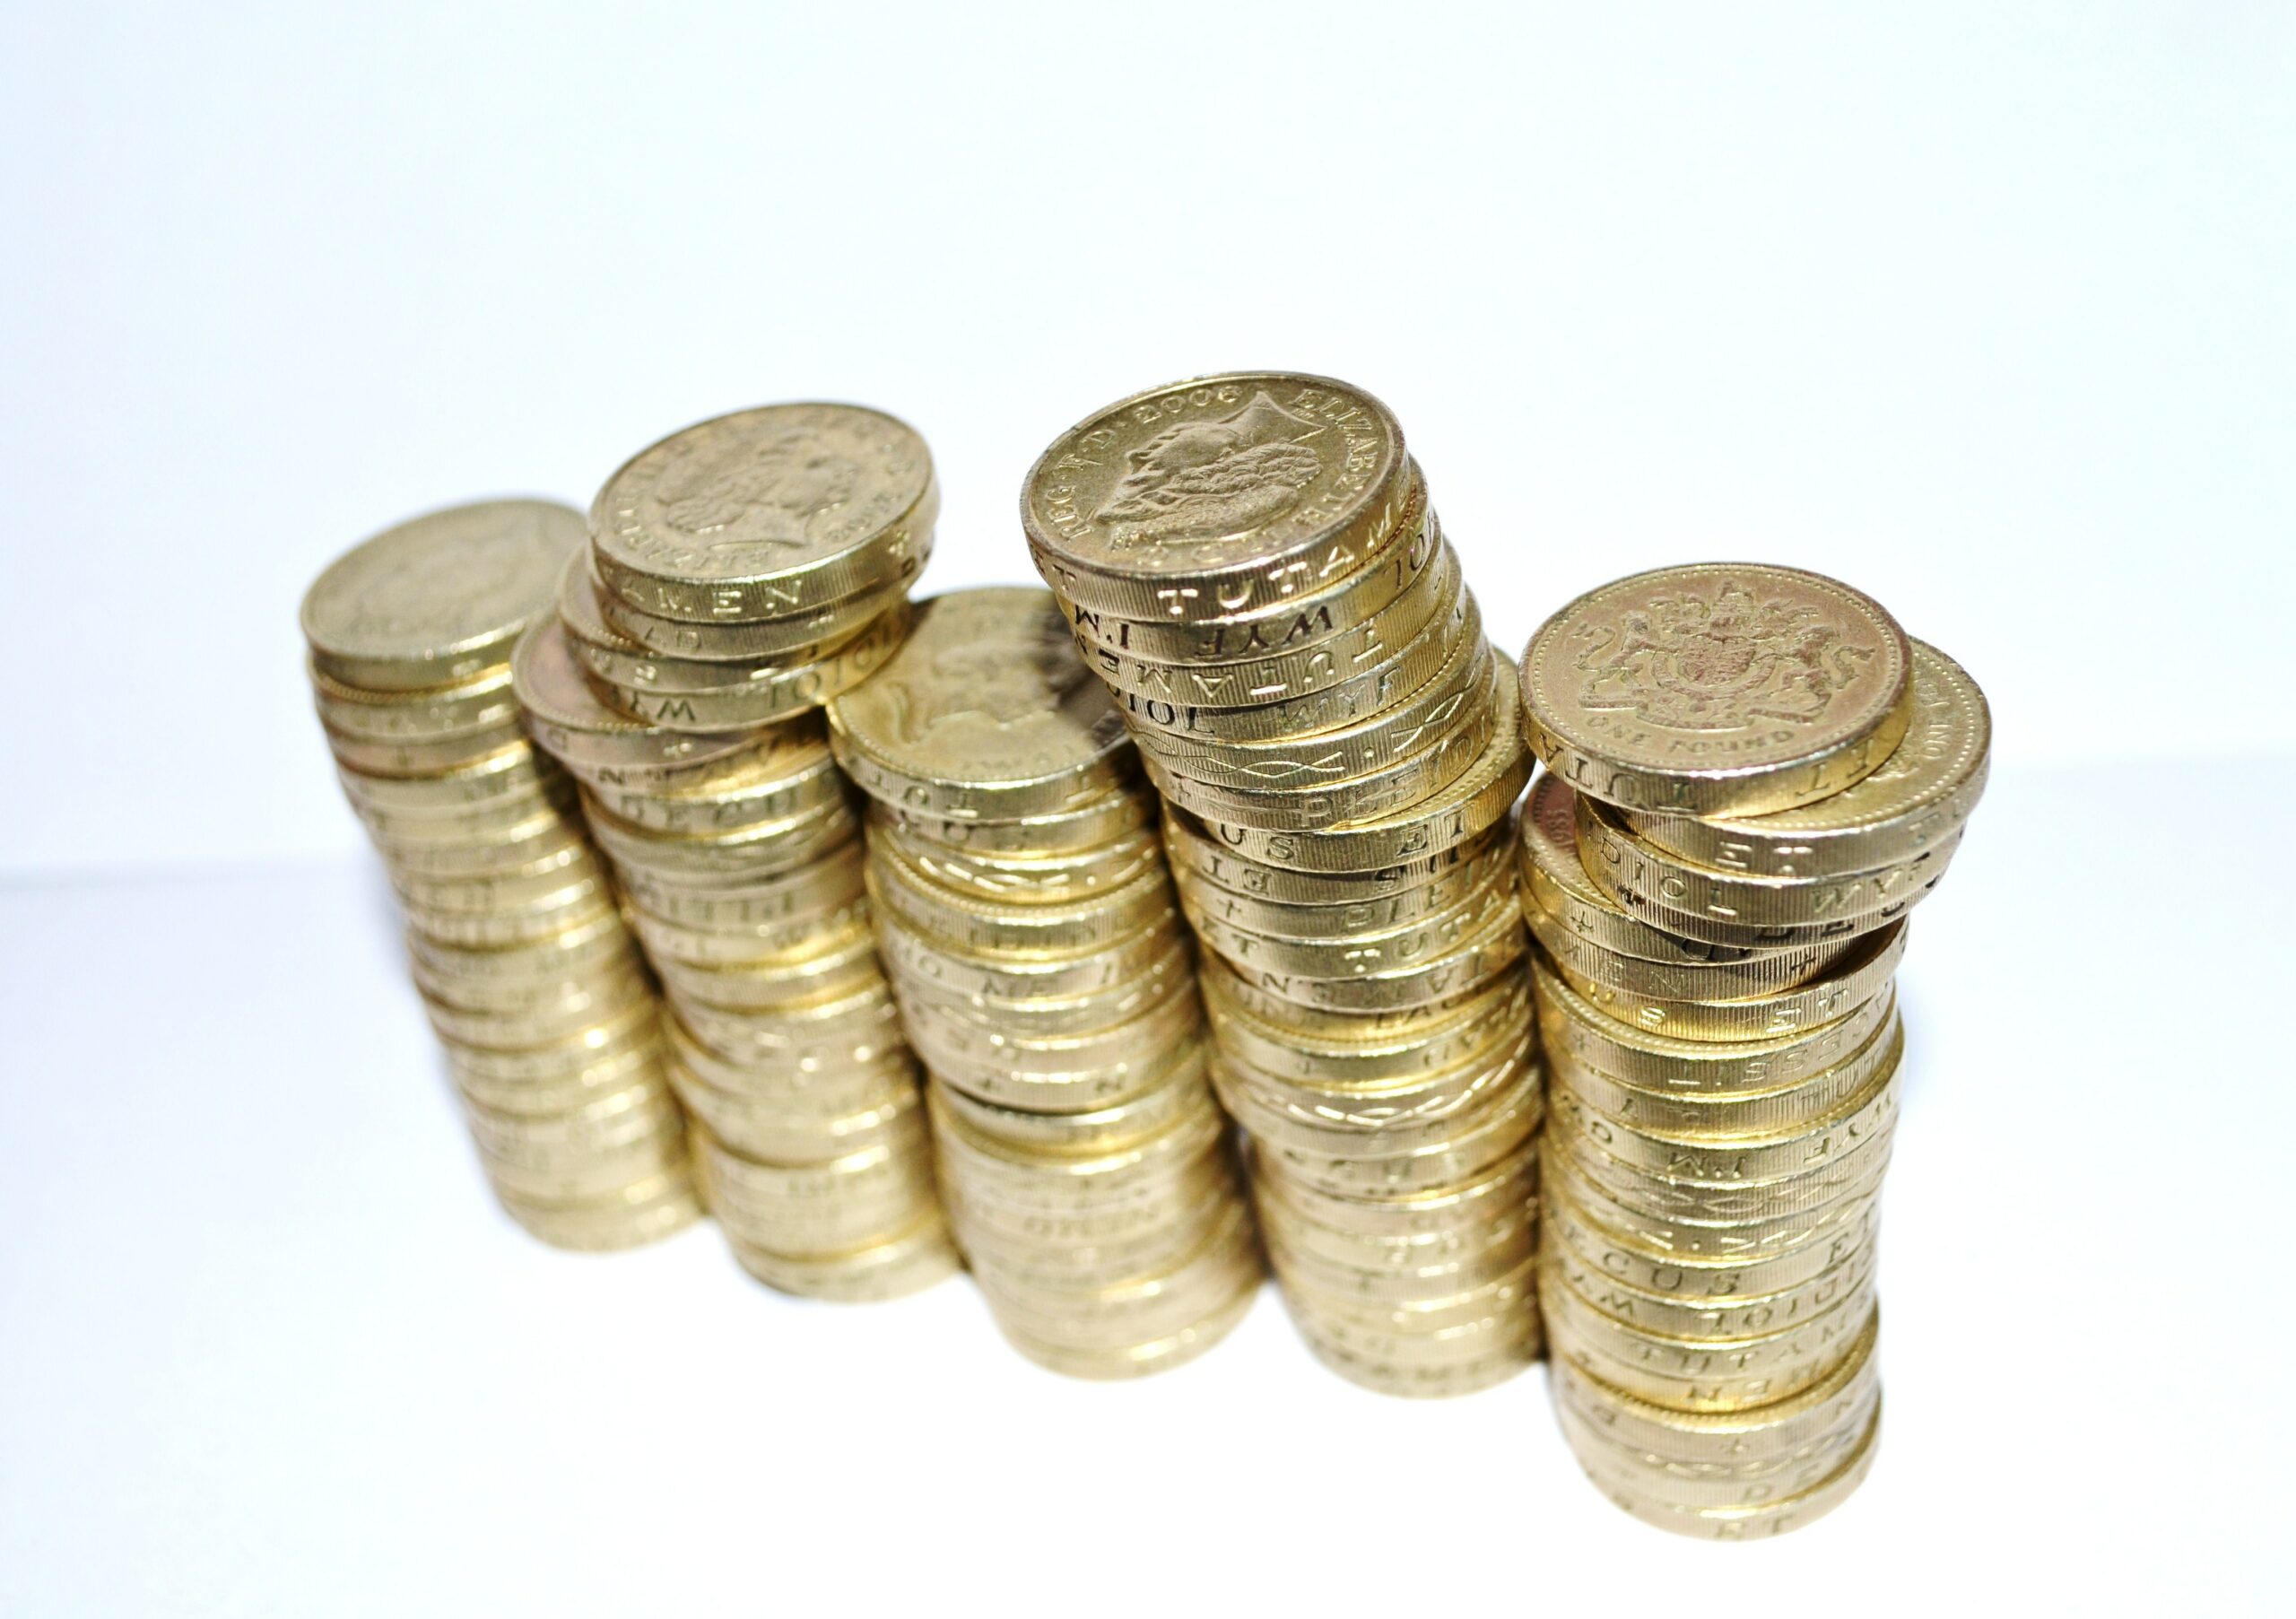 A pile of old-style £1 coins